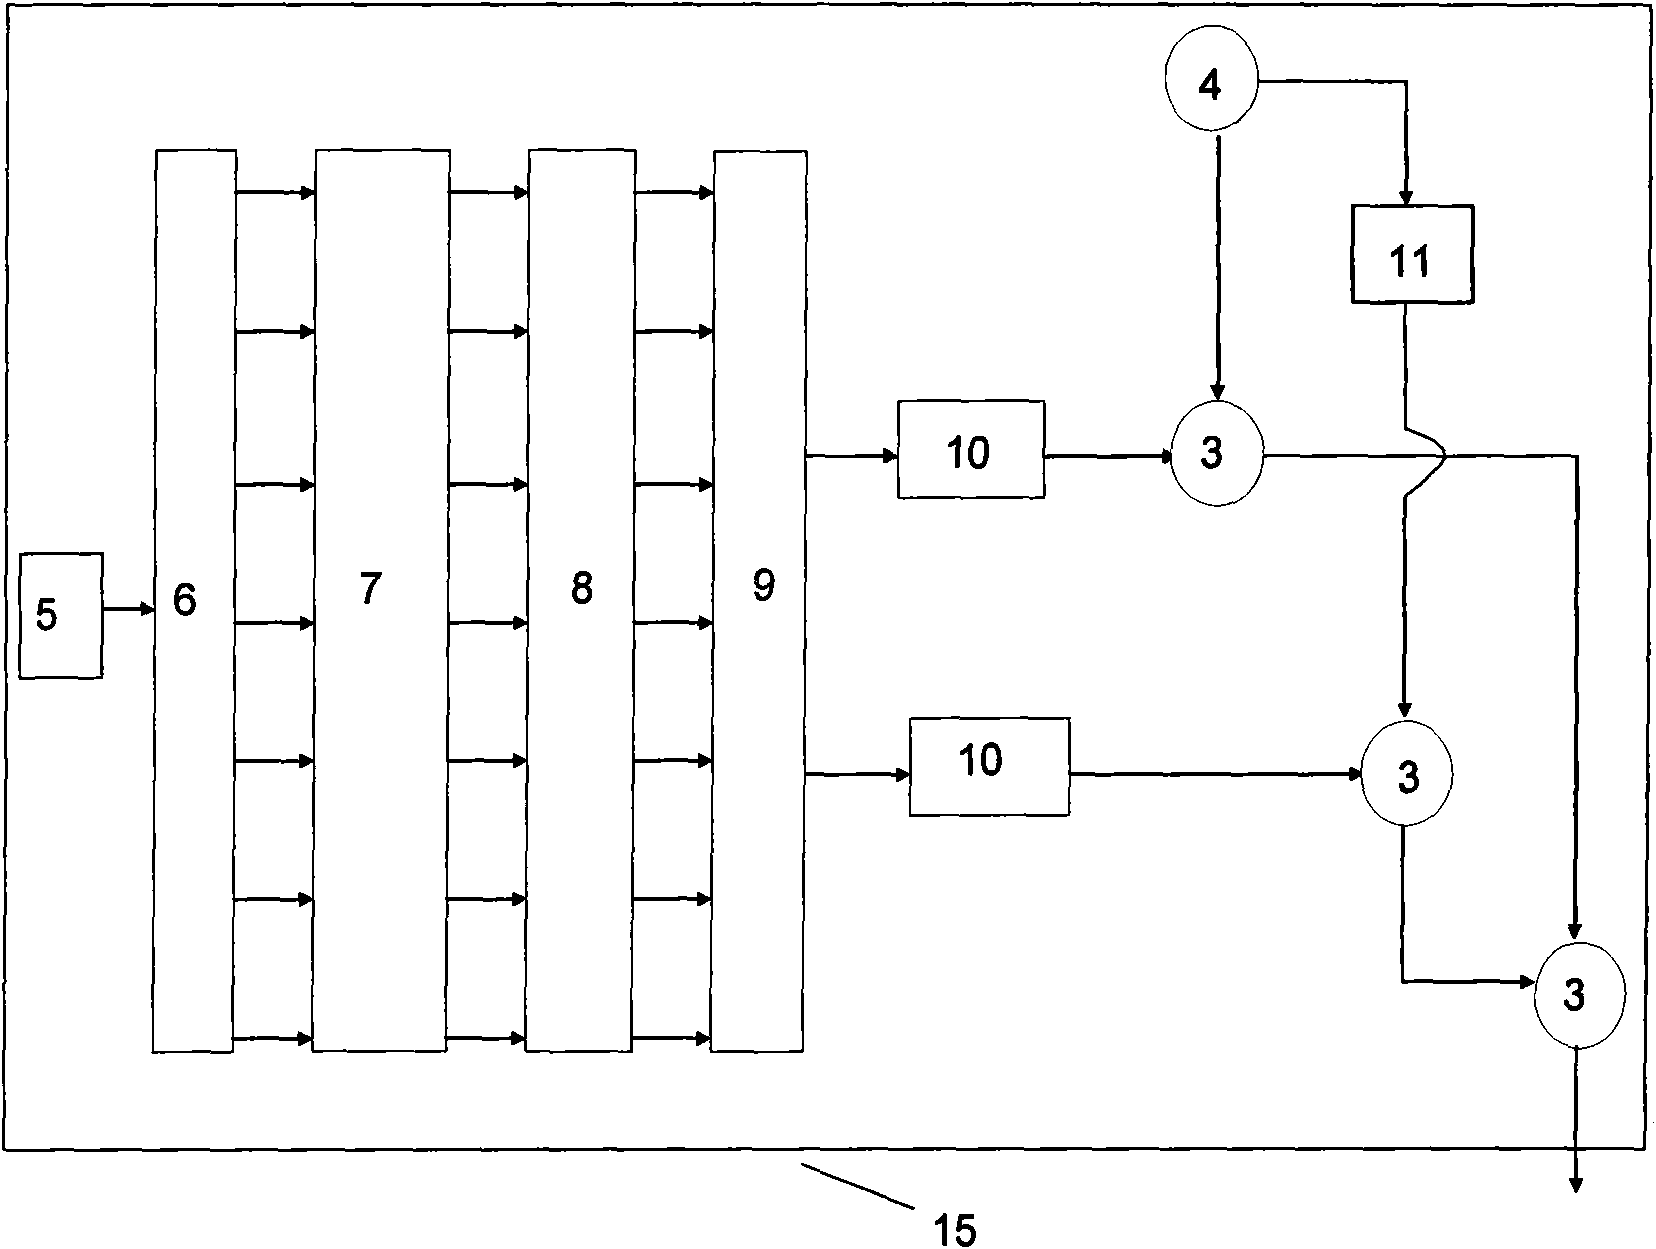 OFDM radio-on-fiber communication system for generating optical millimeter wave by suppressing modulation of optical carrier